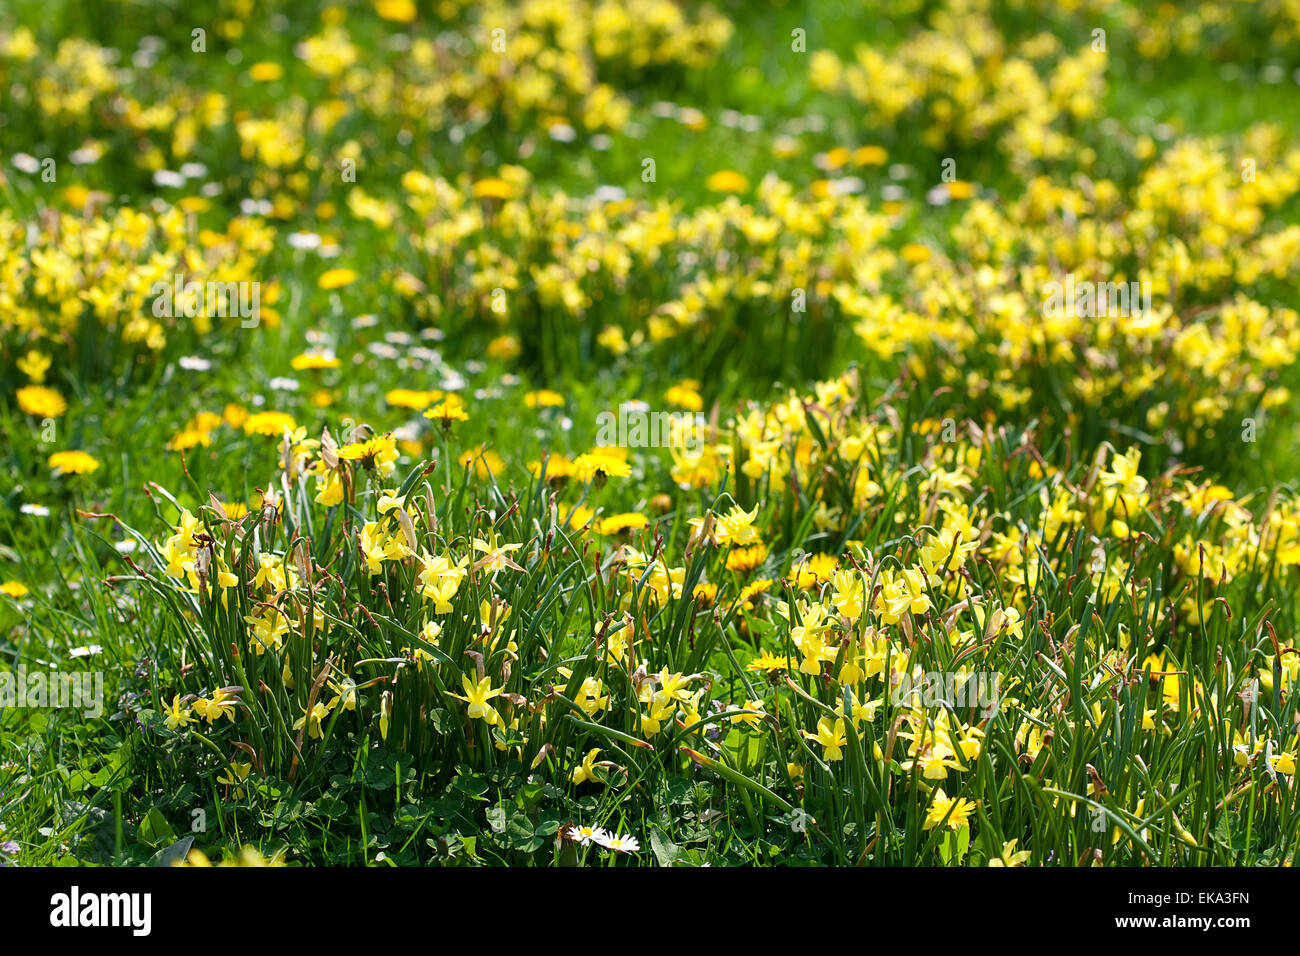 snowdrops and dandelions on the background of green grass Stock Photo